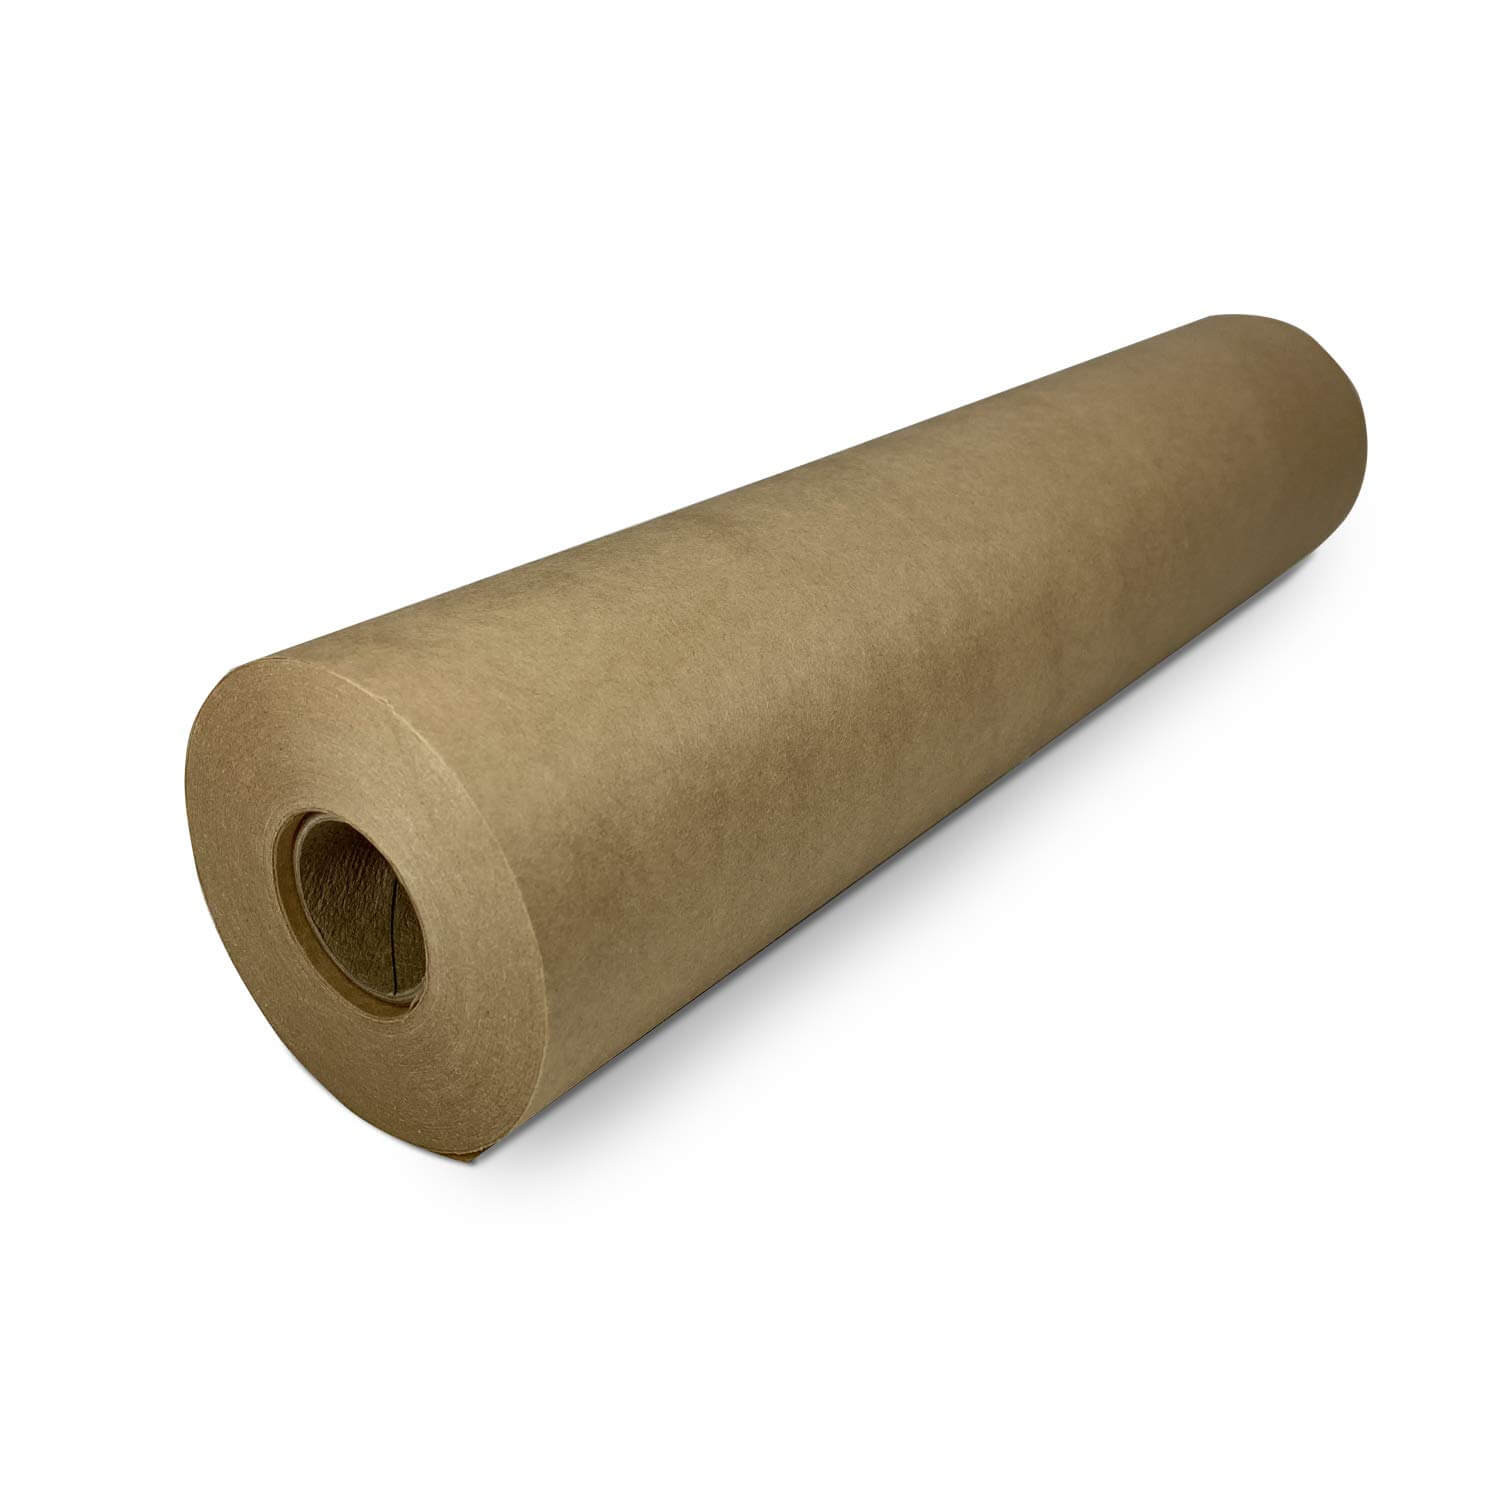 15 in. x 60 Yards Masking Paper